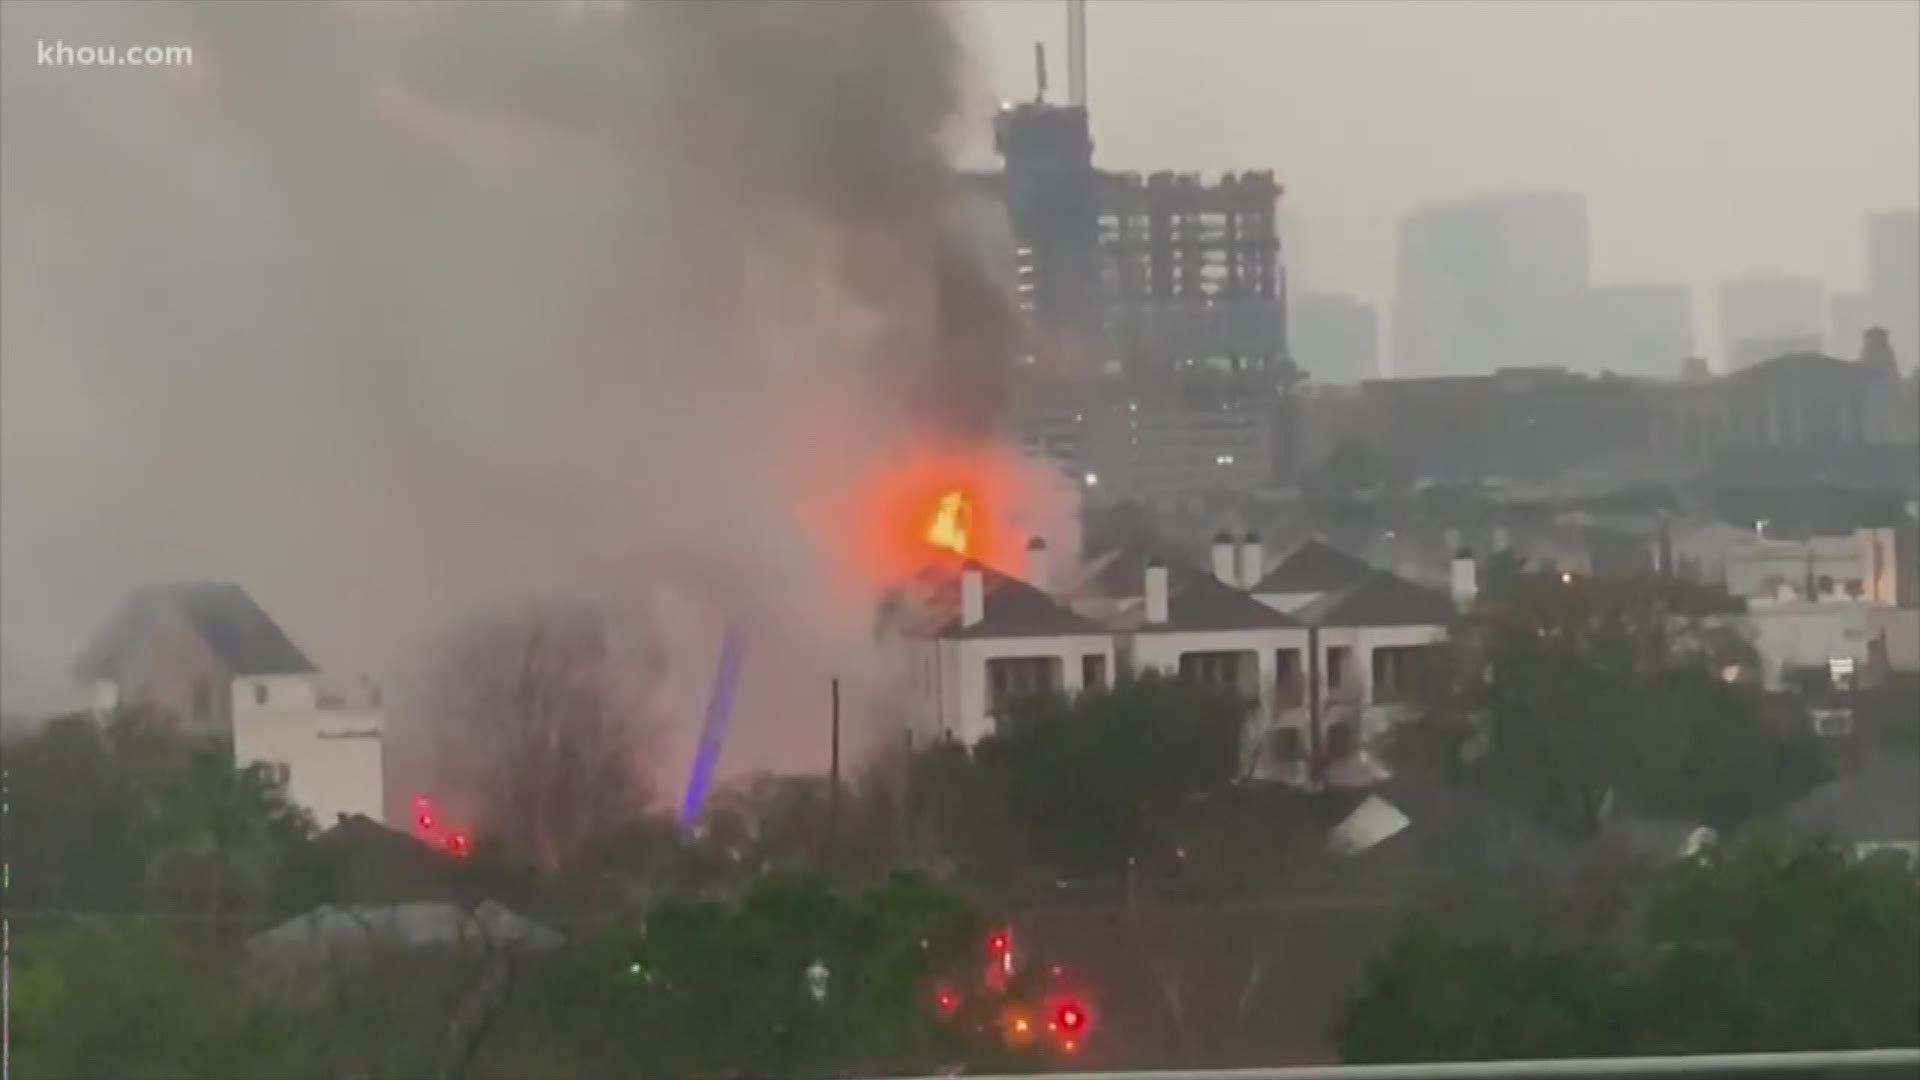 The Houston Fire Department put out a large fire at an apartment complex in the Montrose area Wednesday morning.